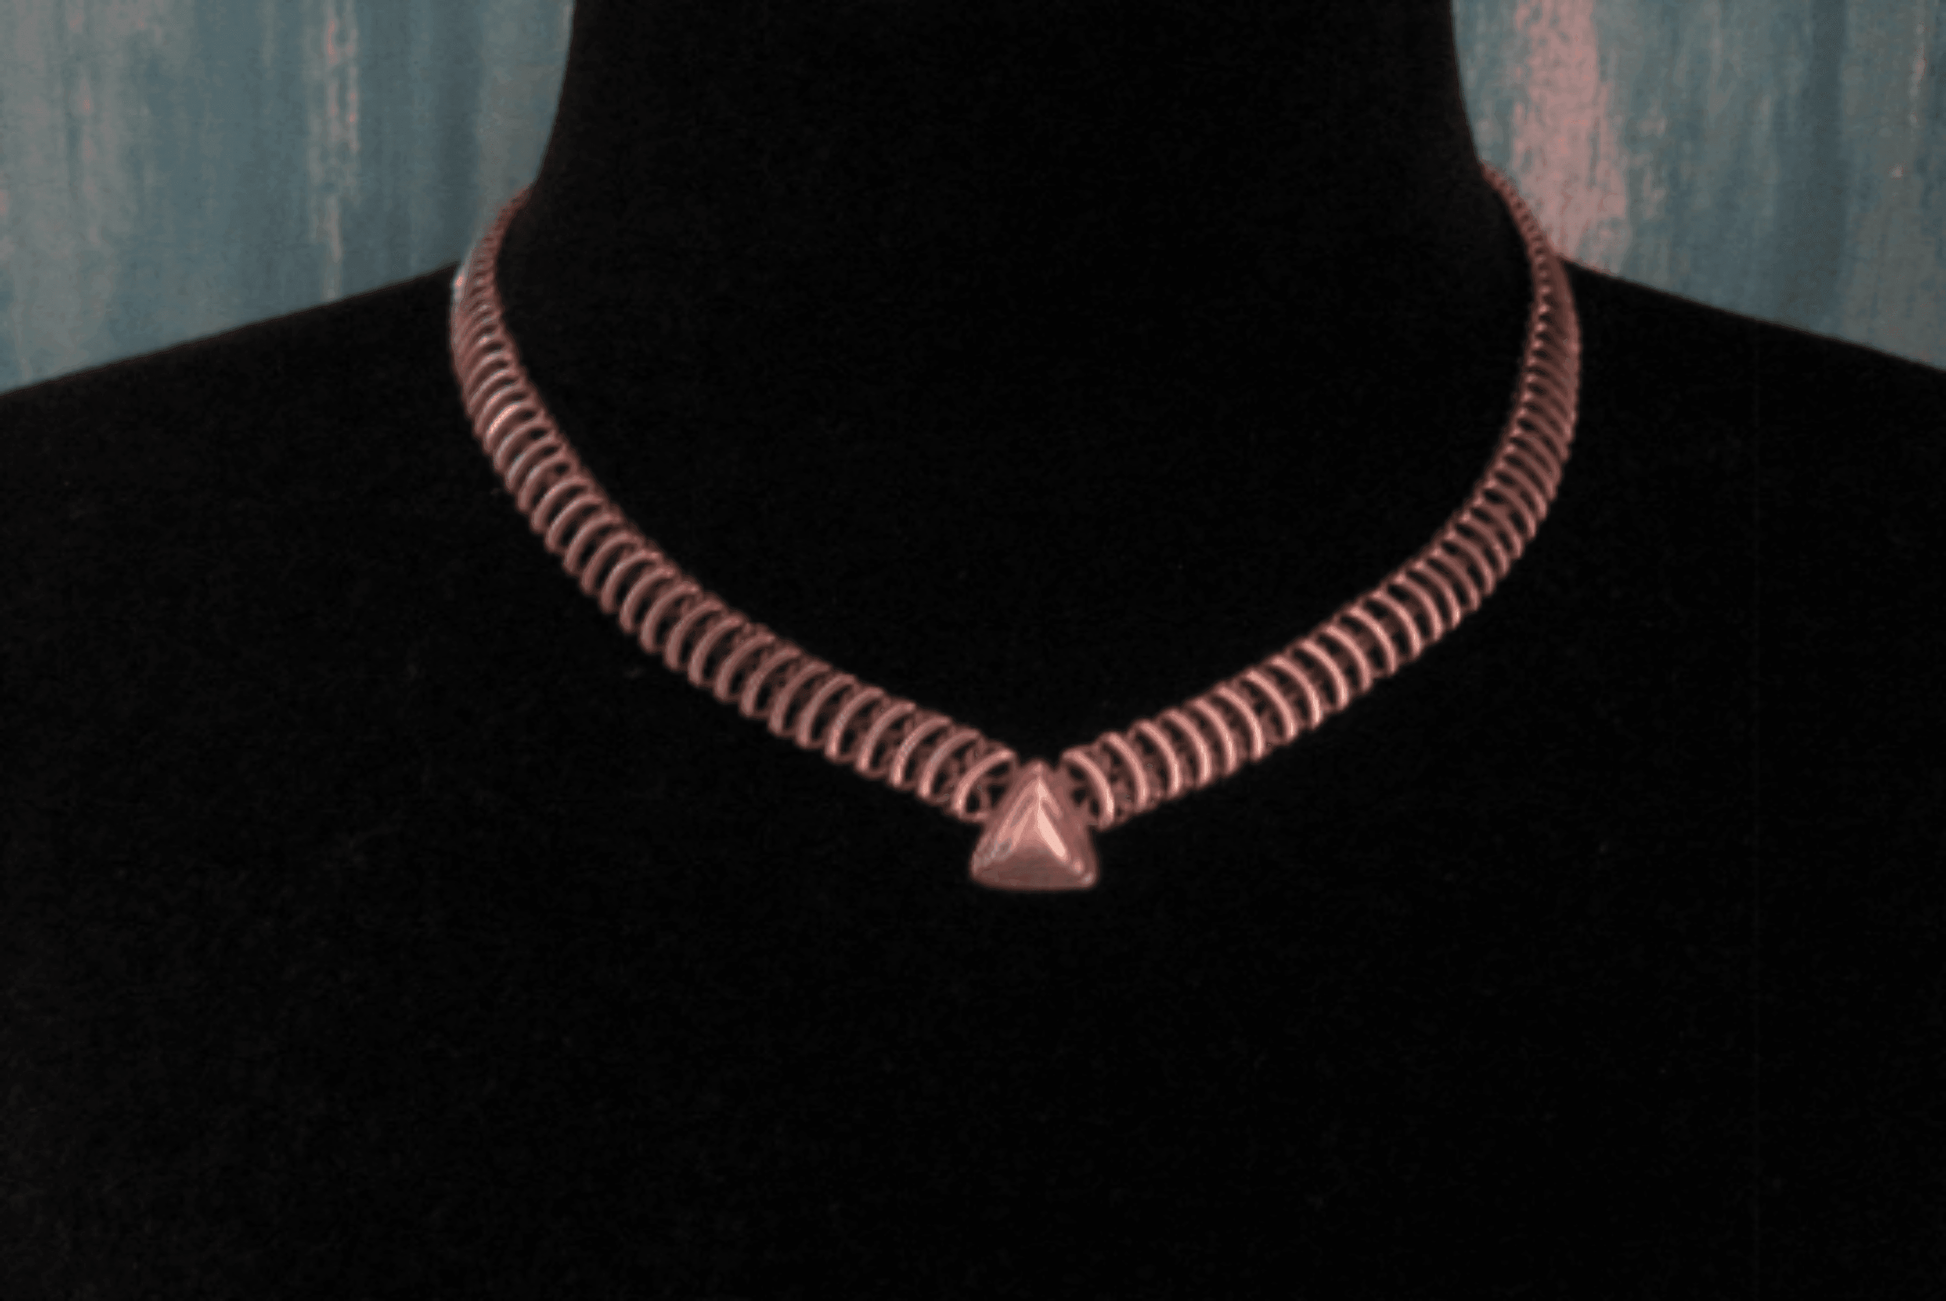 Vintage Mexican Sterling Silver Necklace Choker with Snap Clasp - Anteeka